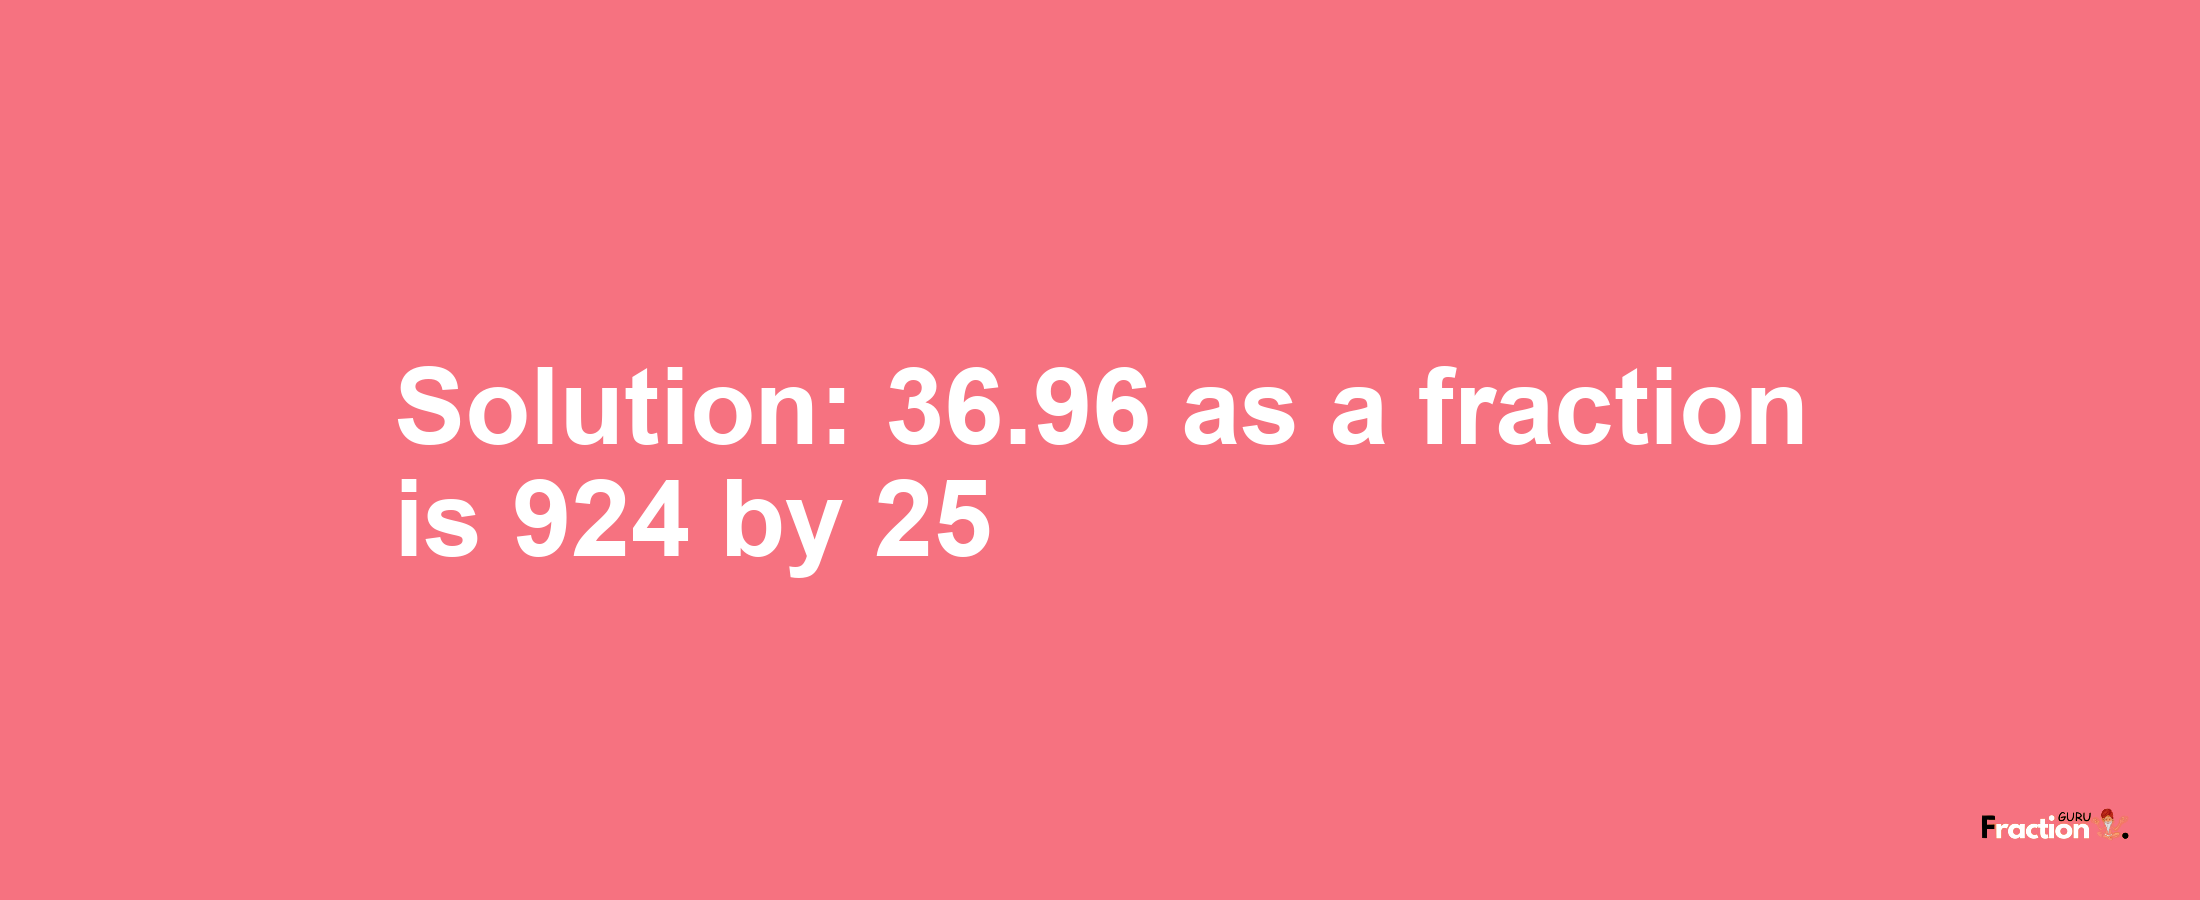 Solution:36.96 as a fraction is 924/25